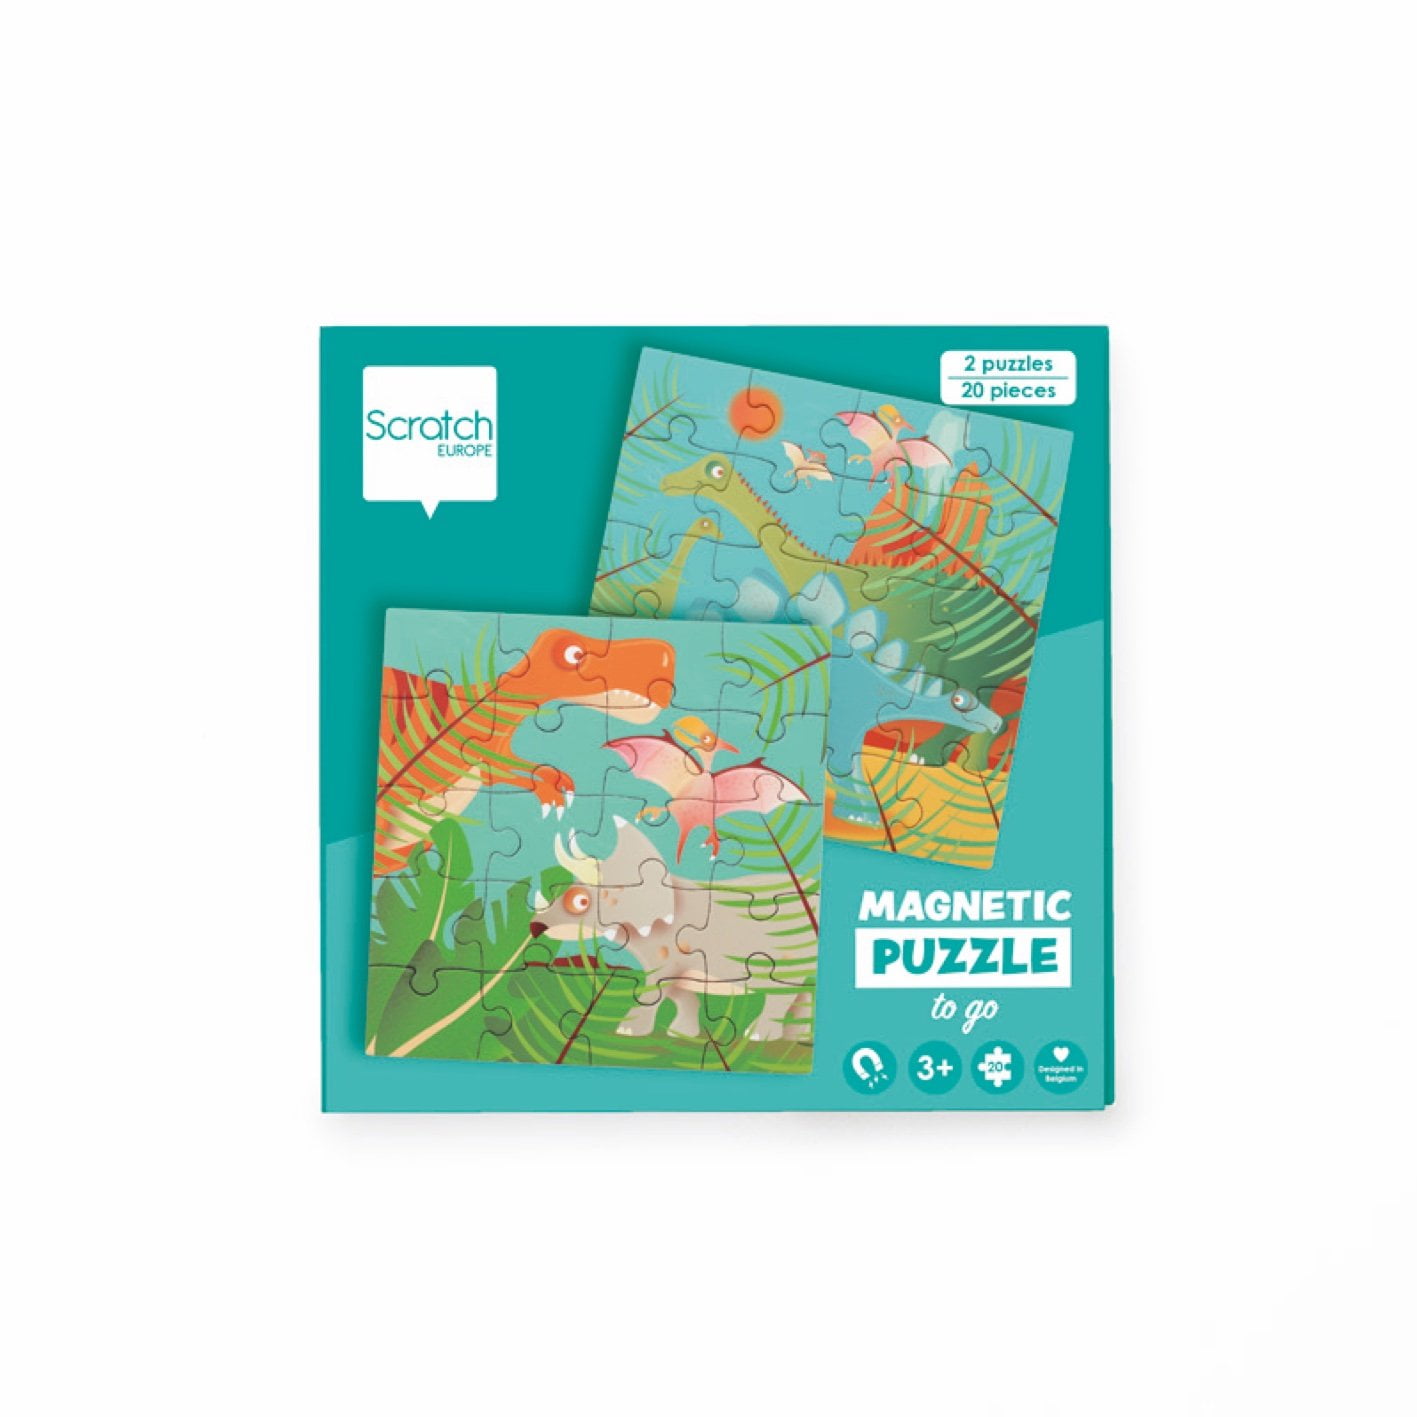 Scratch Magnetic puzzle book - Dino